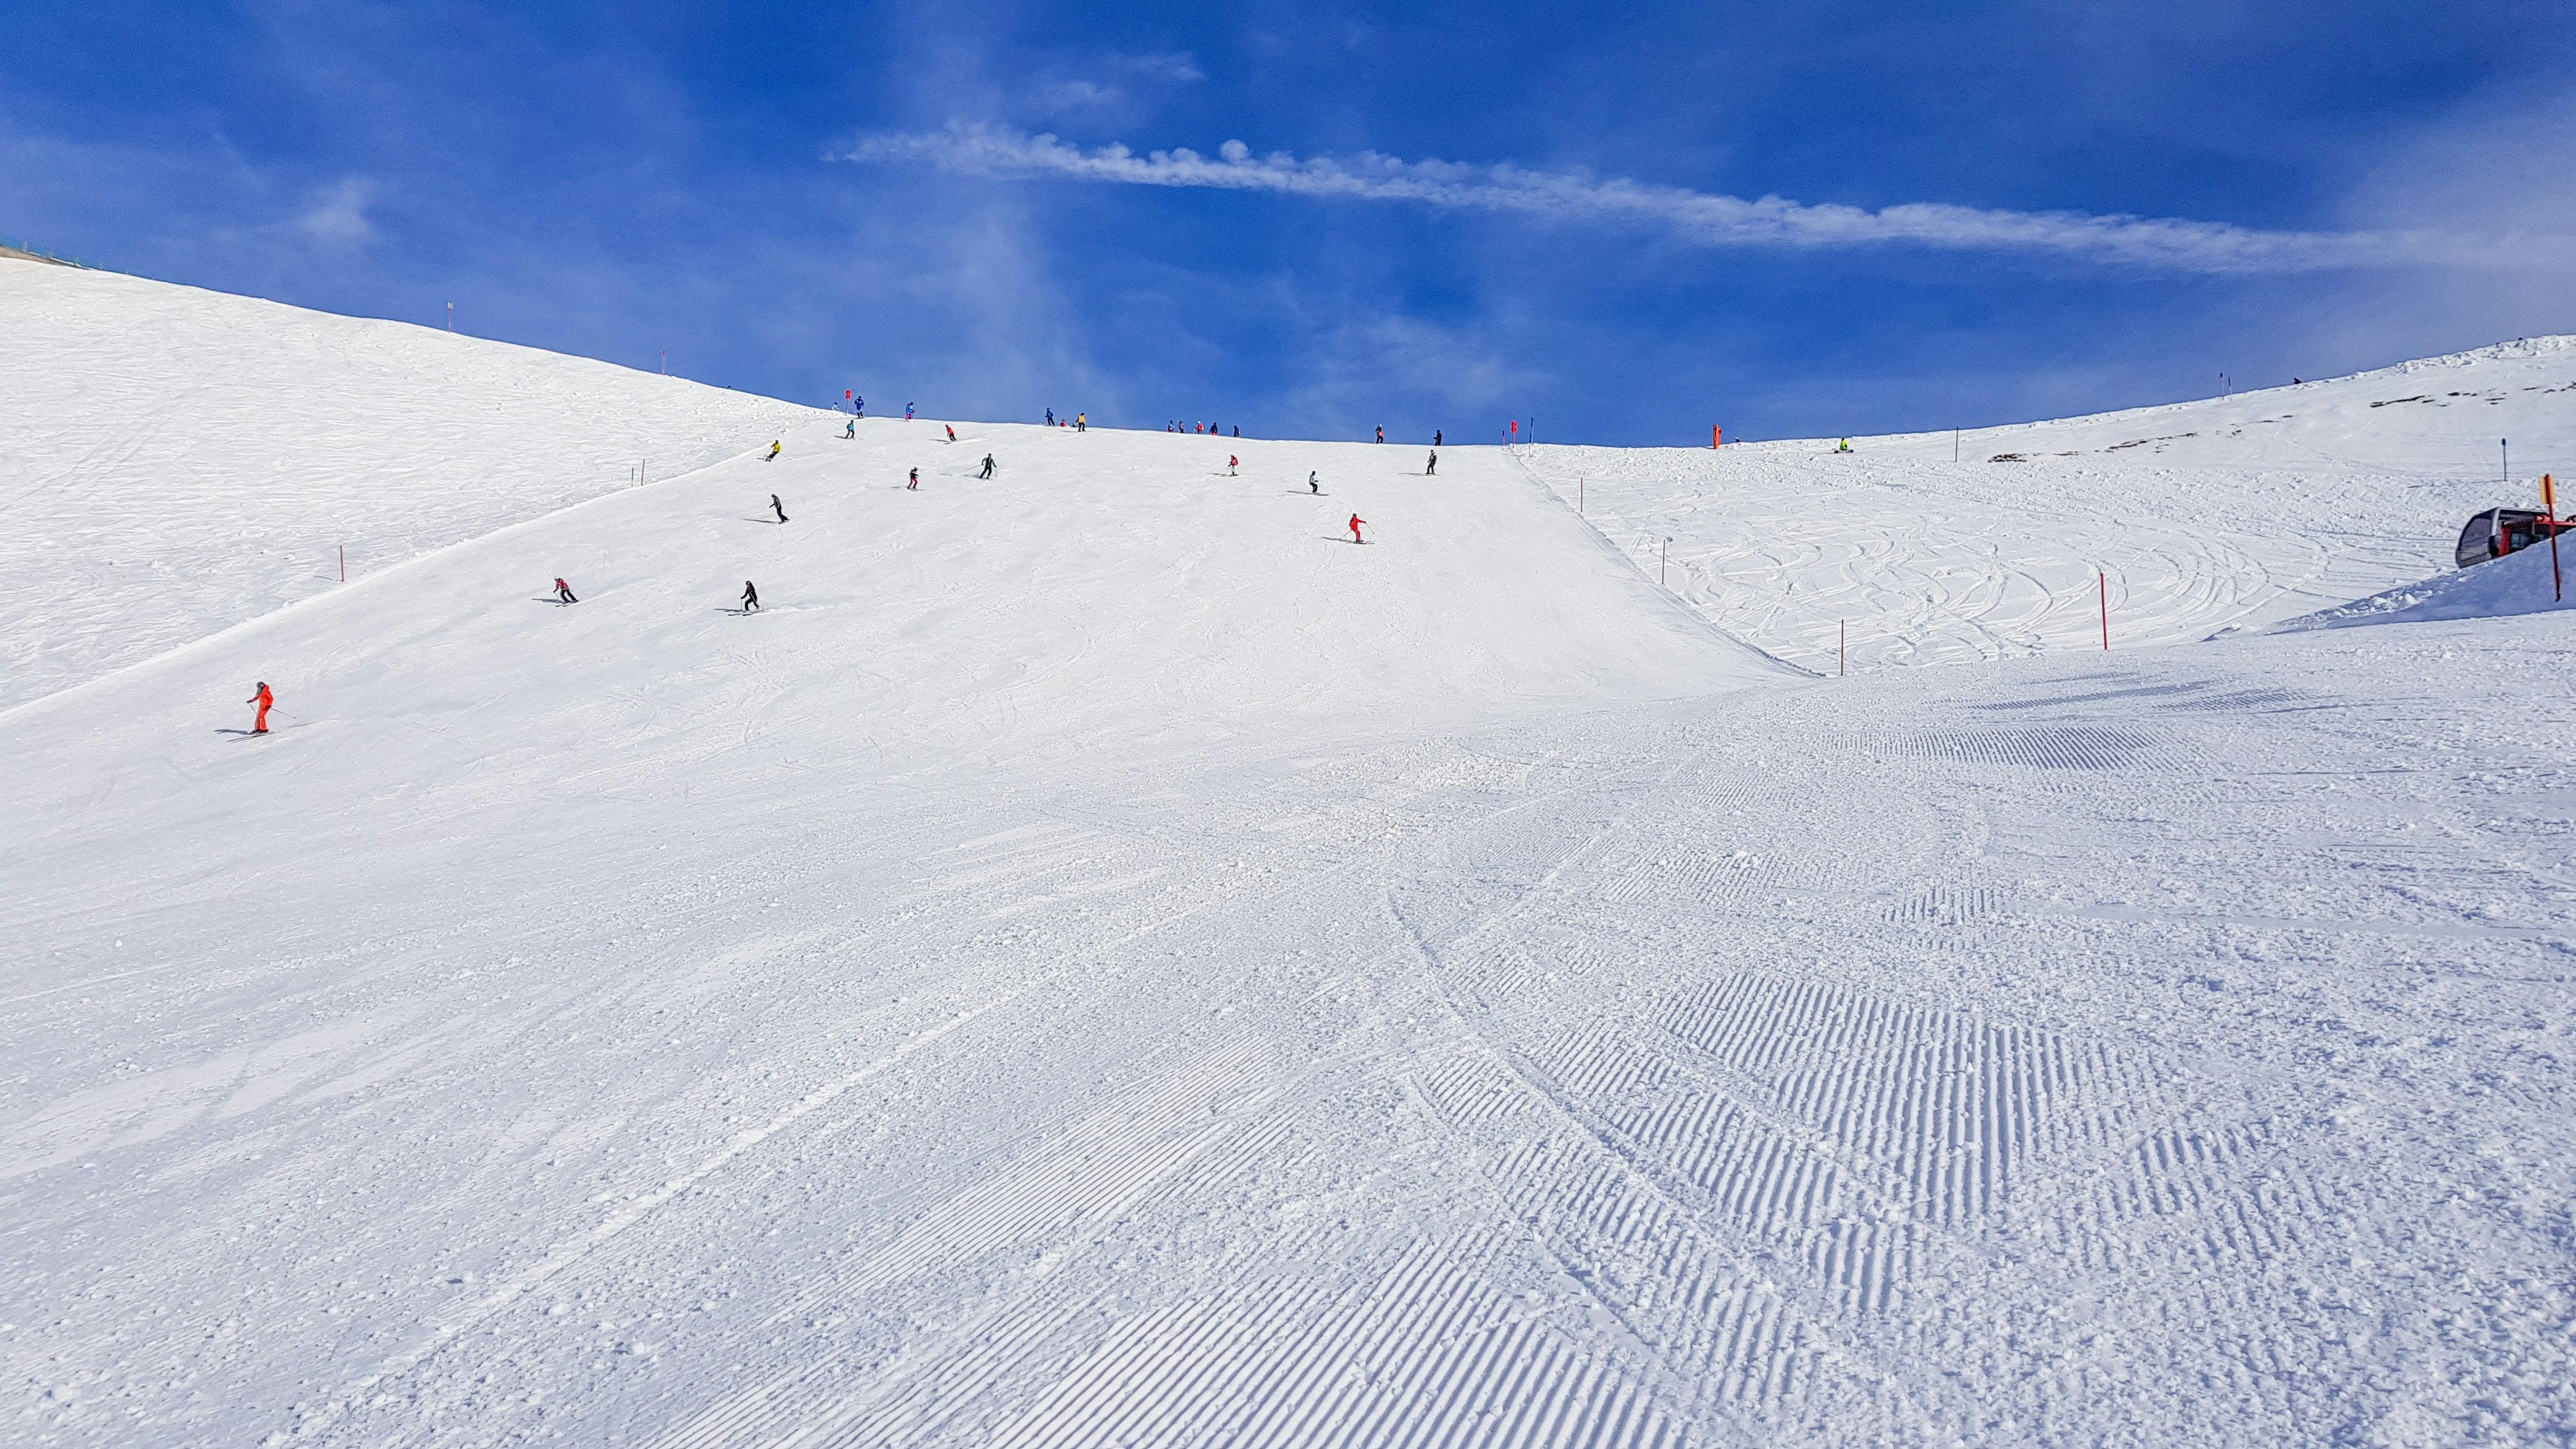 A wide-open groomed run at a ski hill with numerous skiers on it